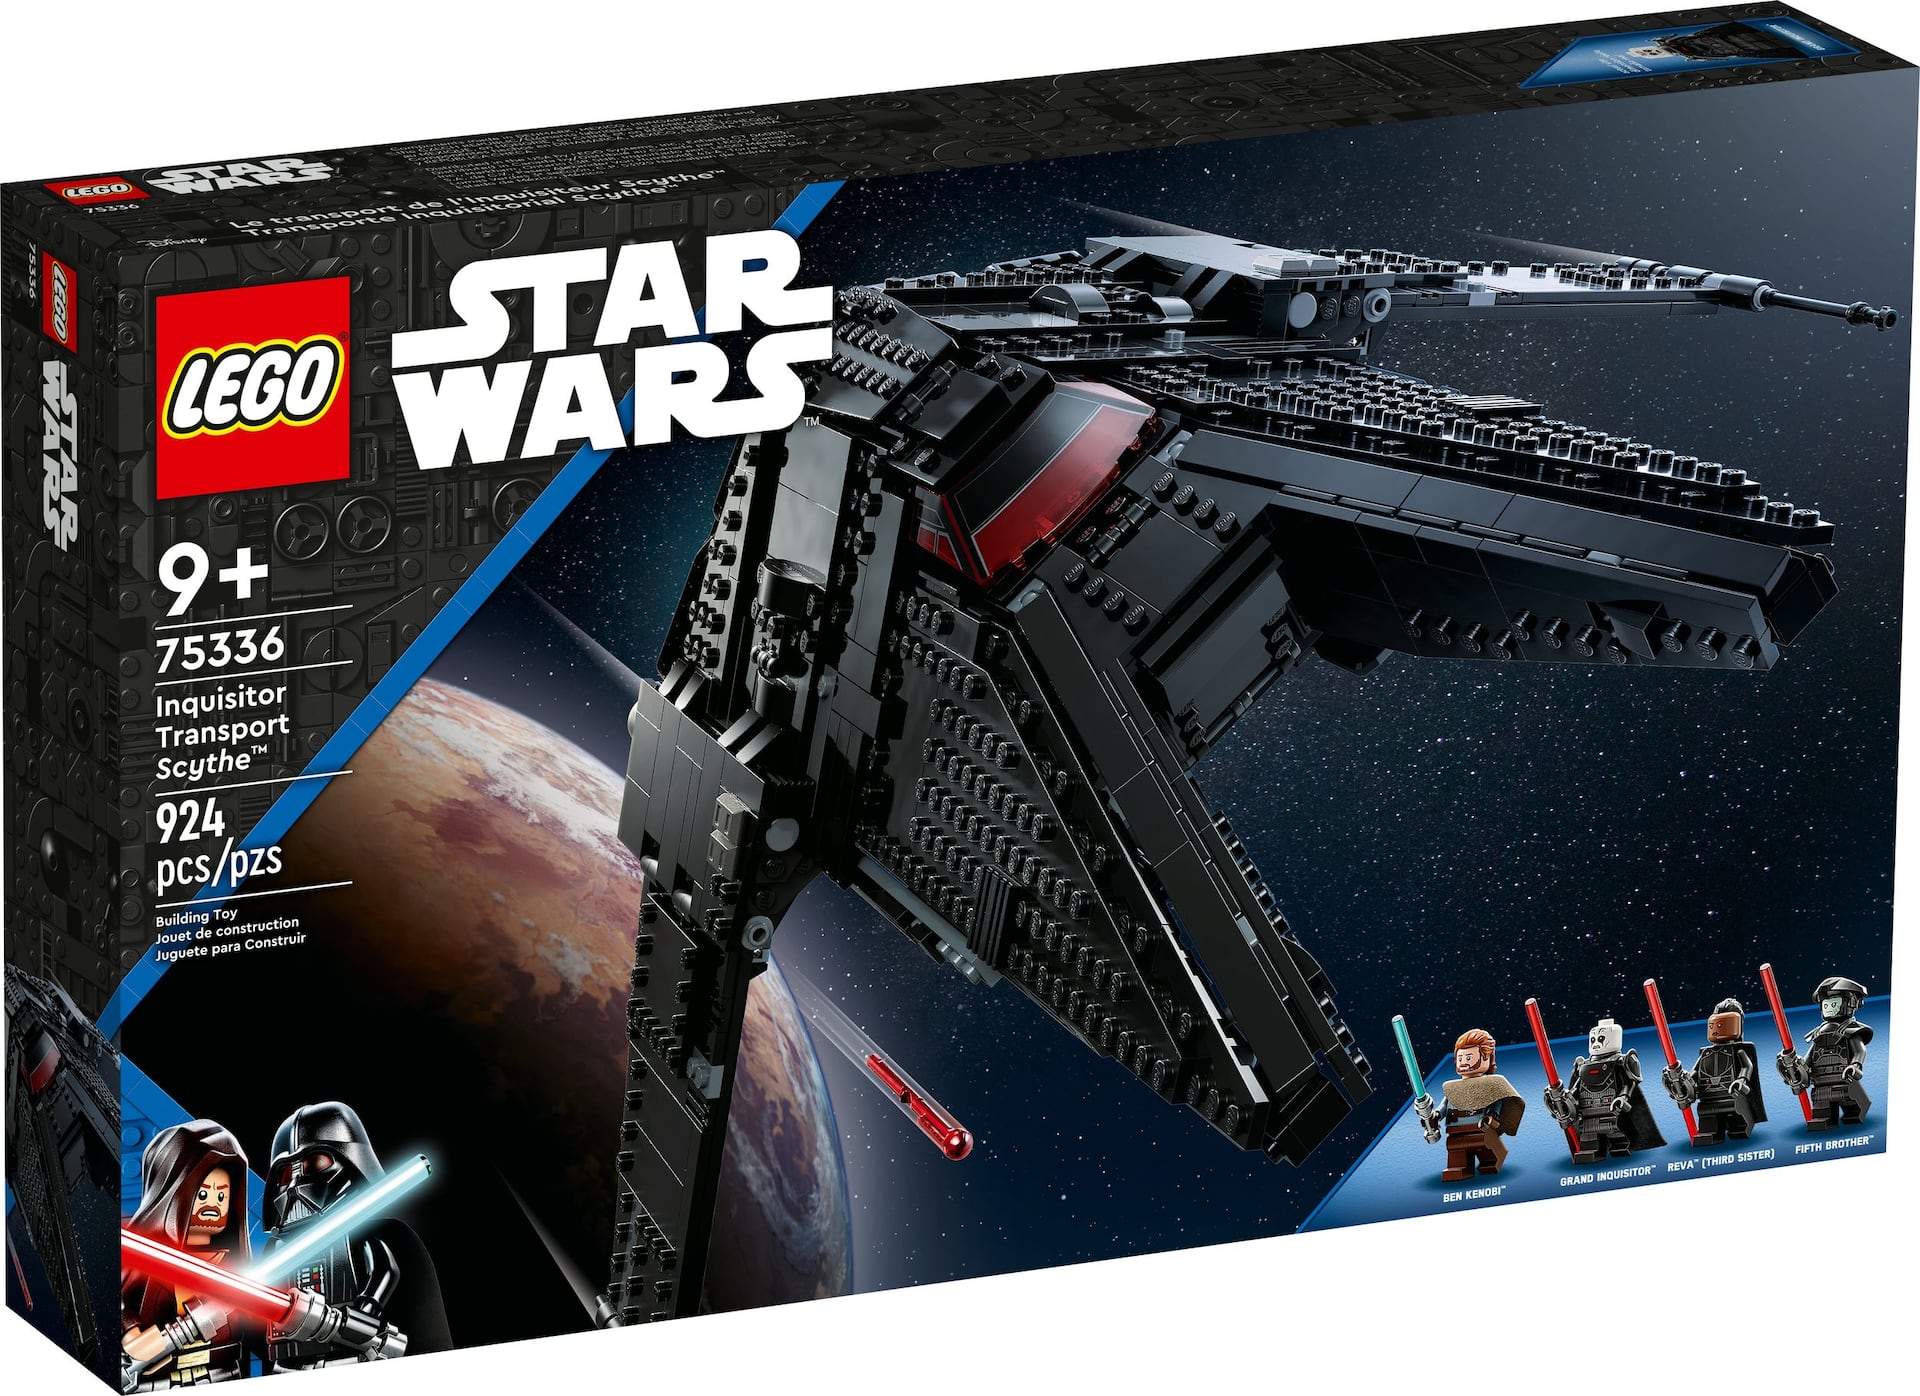 LEGO® Star Wars™ Inquisitor Transport Scythe™ - 75366, Ages 9+